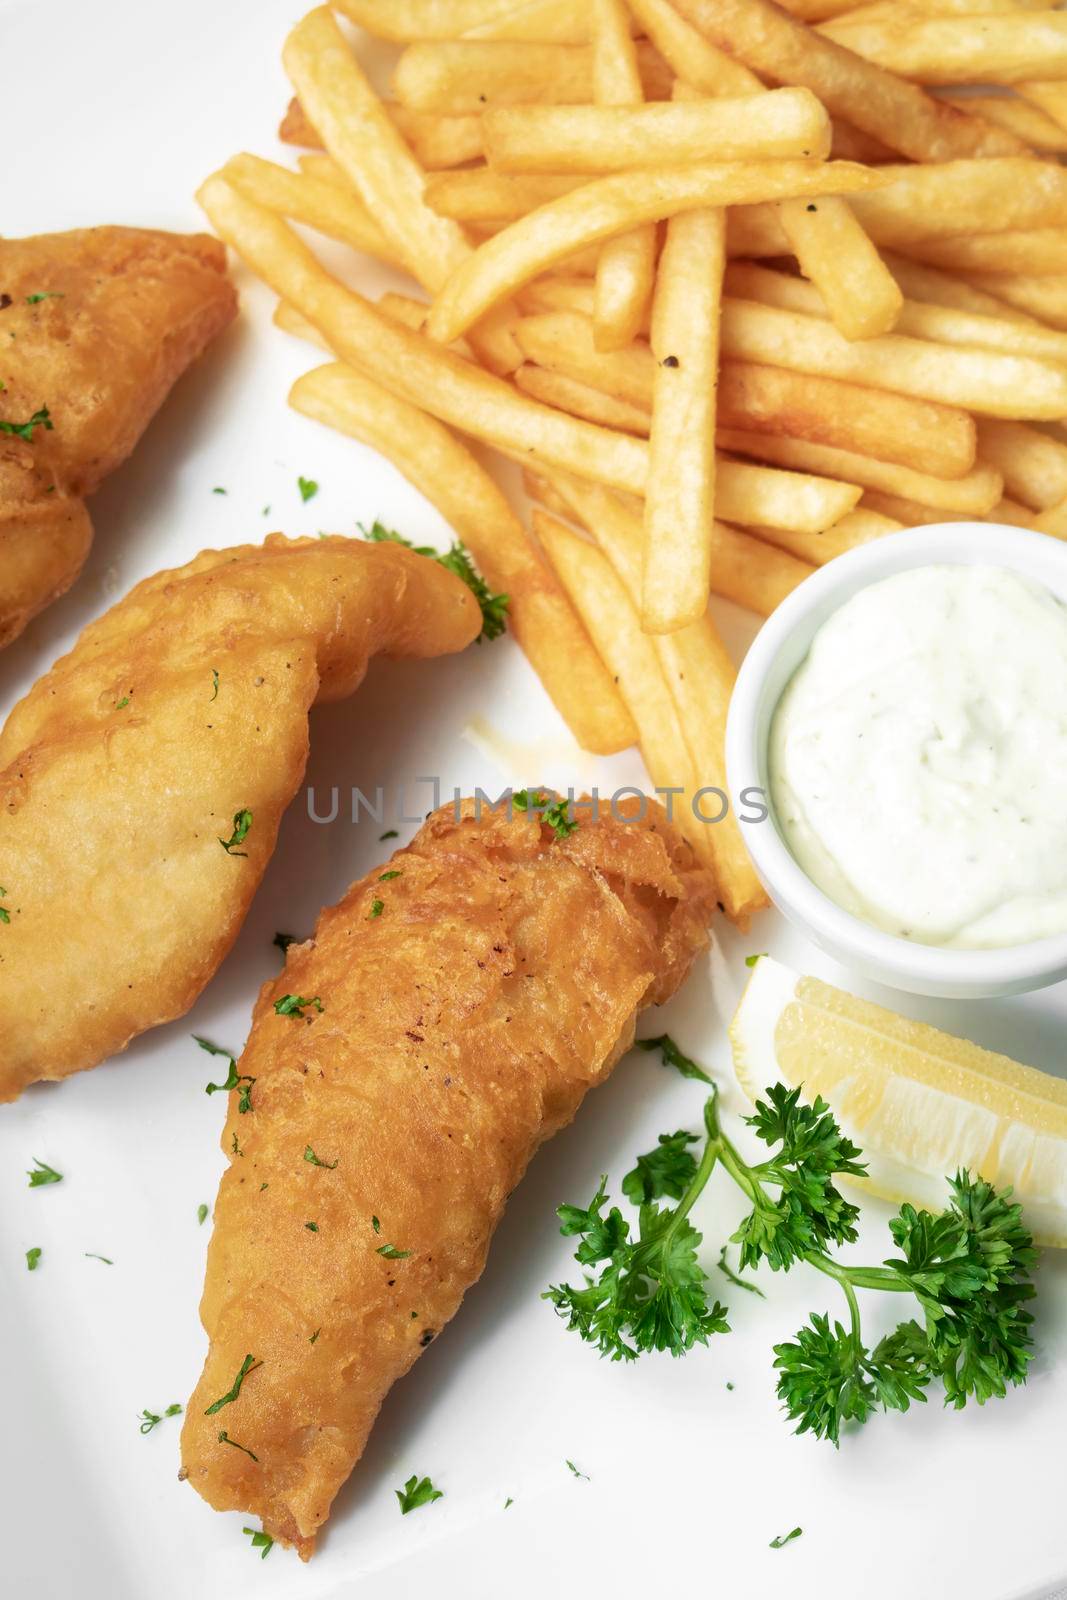 british traditional fish and chips meal on plate by jackmalipan